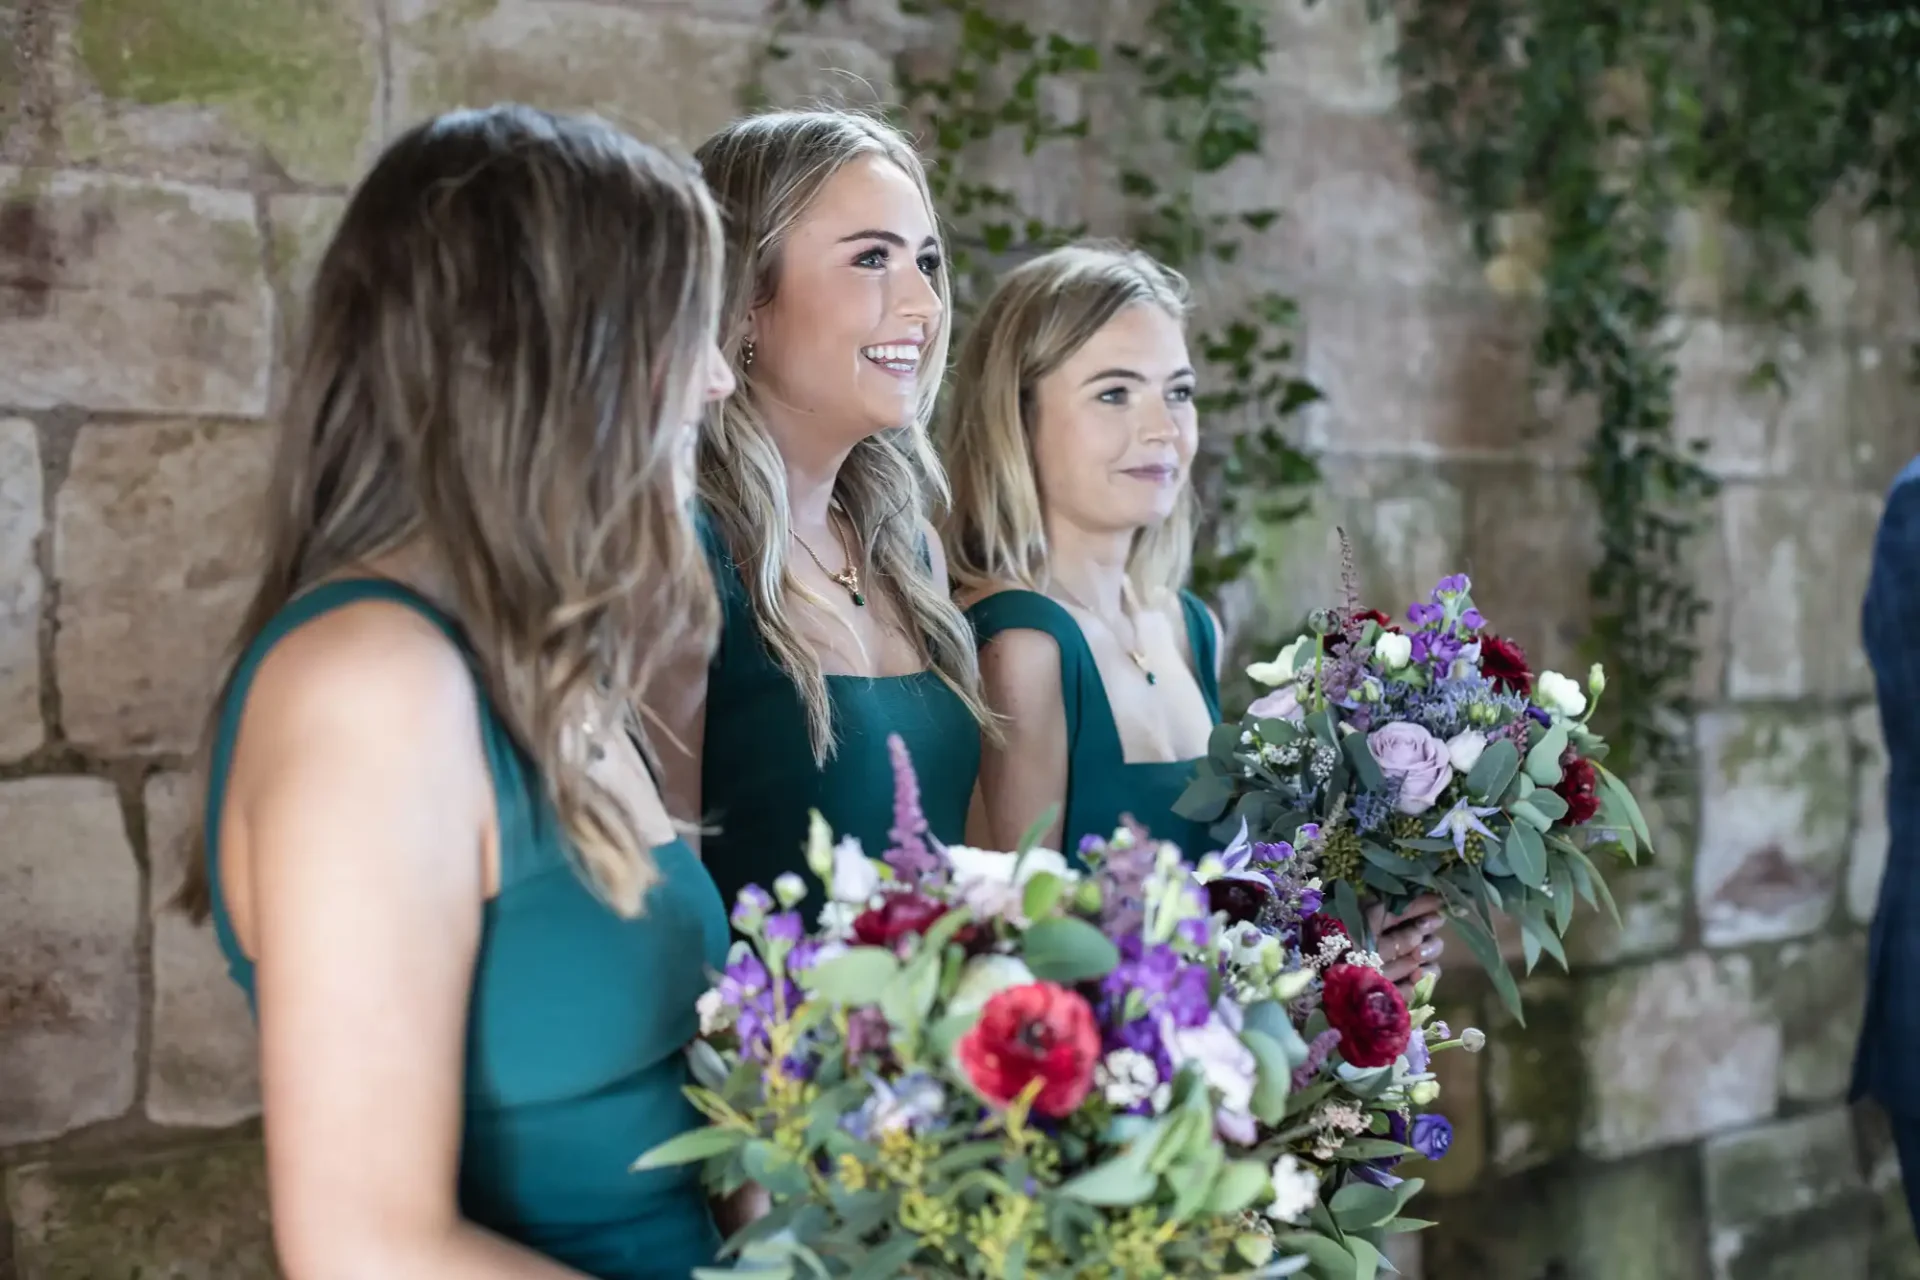 Three women in green dresses holding colorful flower bouquets stand in front of a stone wall adorned with greenery.